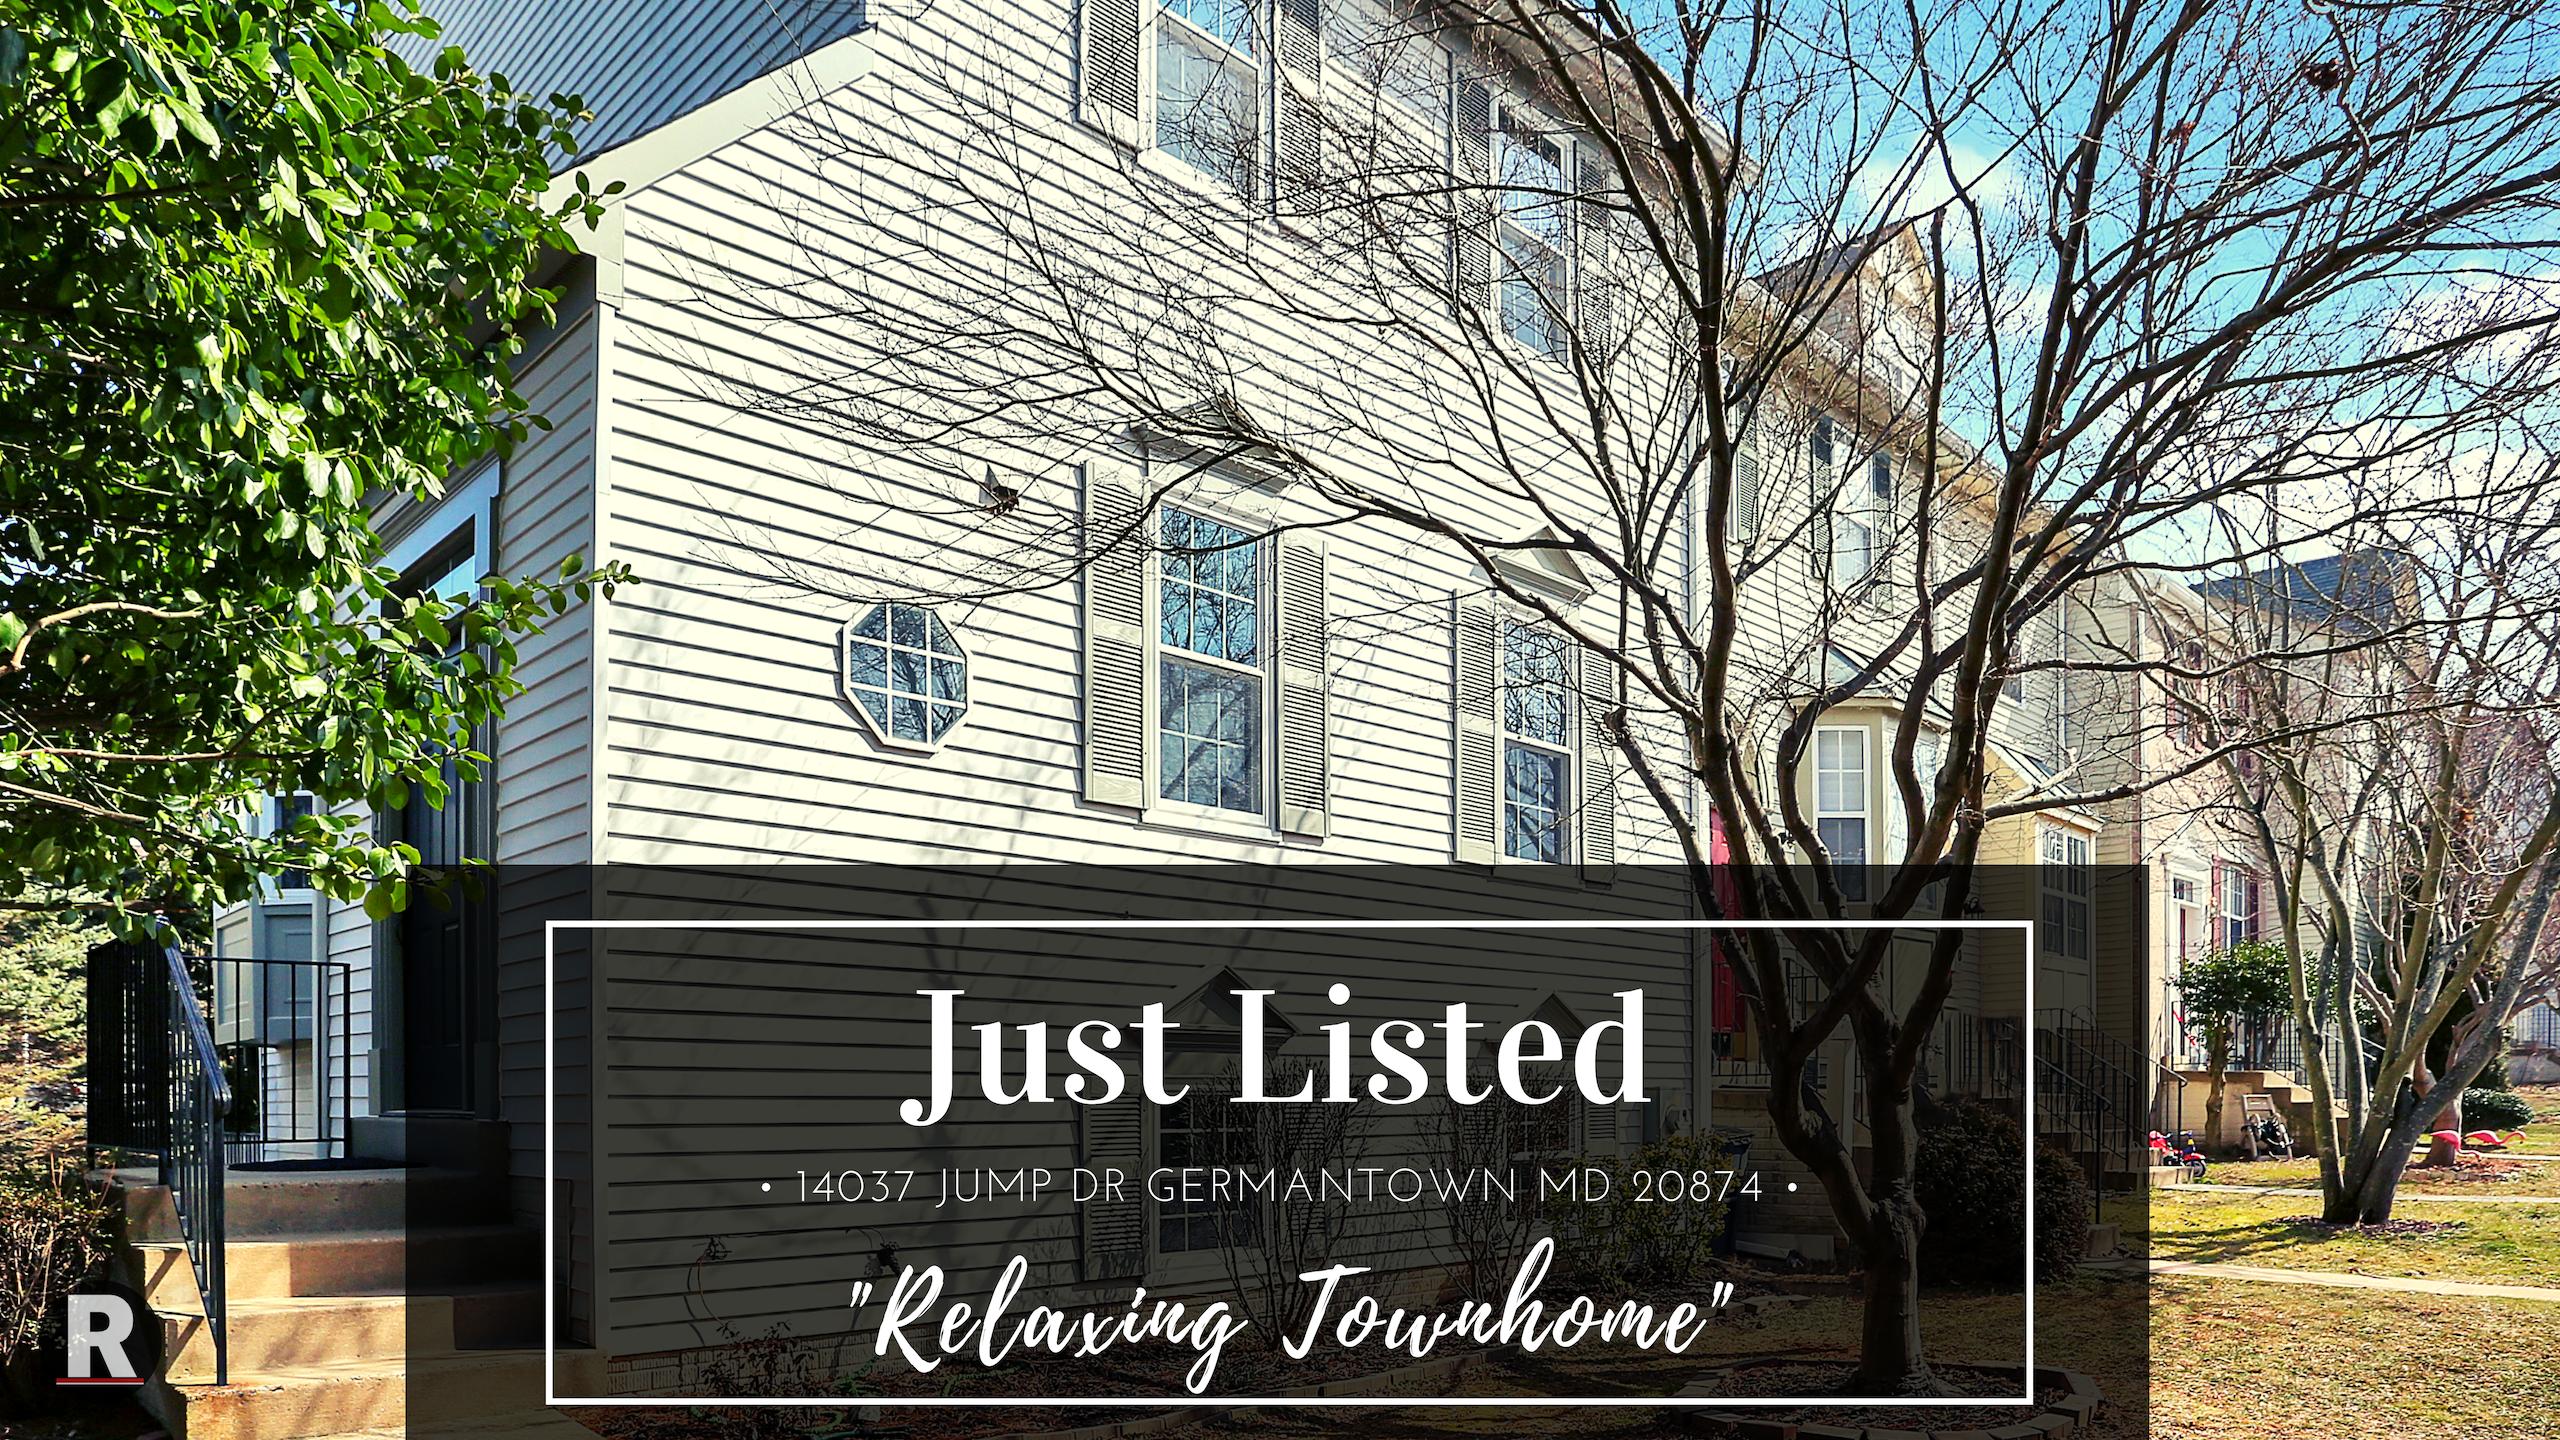 Just Listed! 14037 Jump Dr Germantown MD 20874